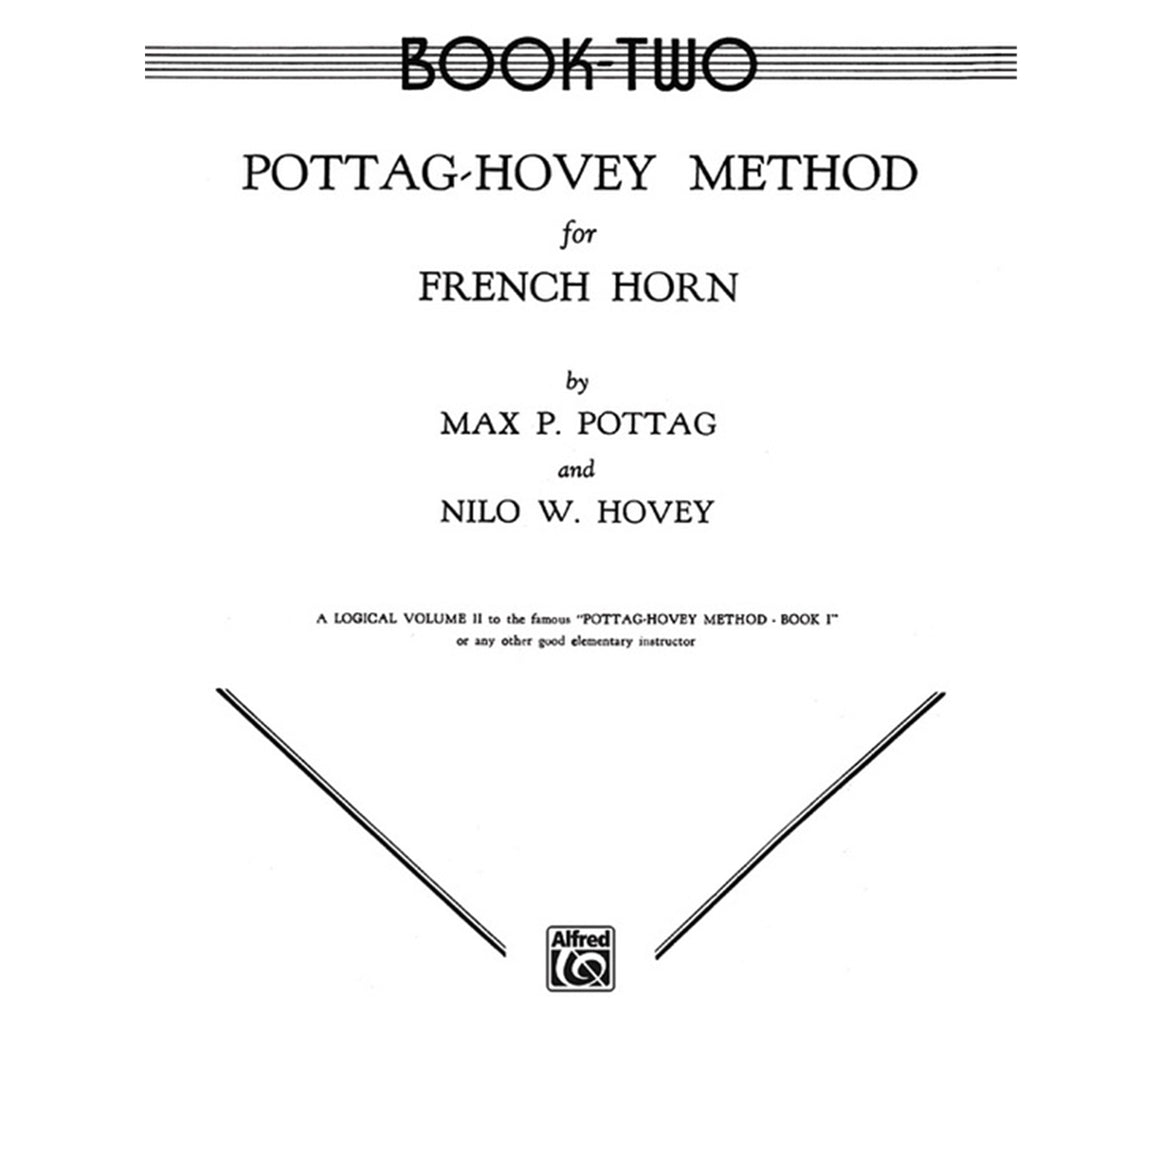 ALFRED 00EL00106 Pottag-Hovey Method for French Horn, Book II